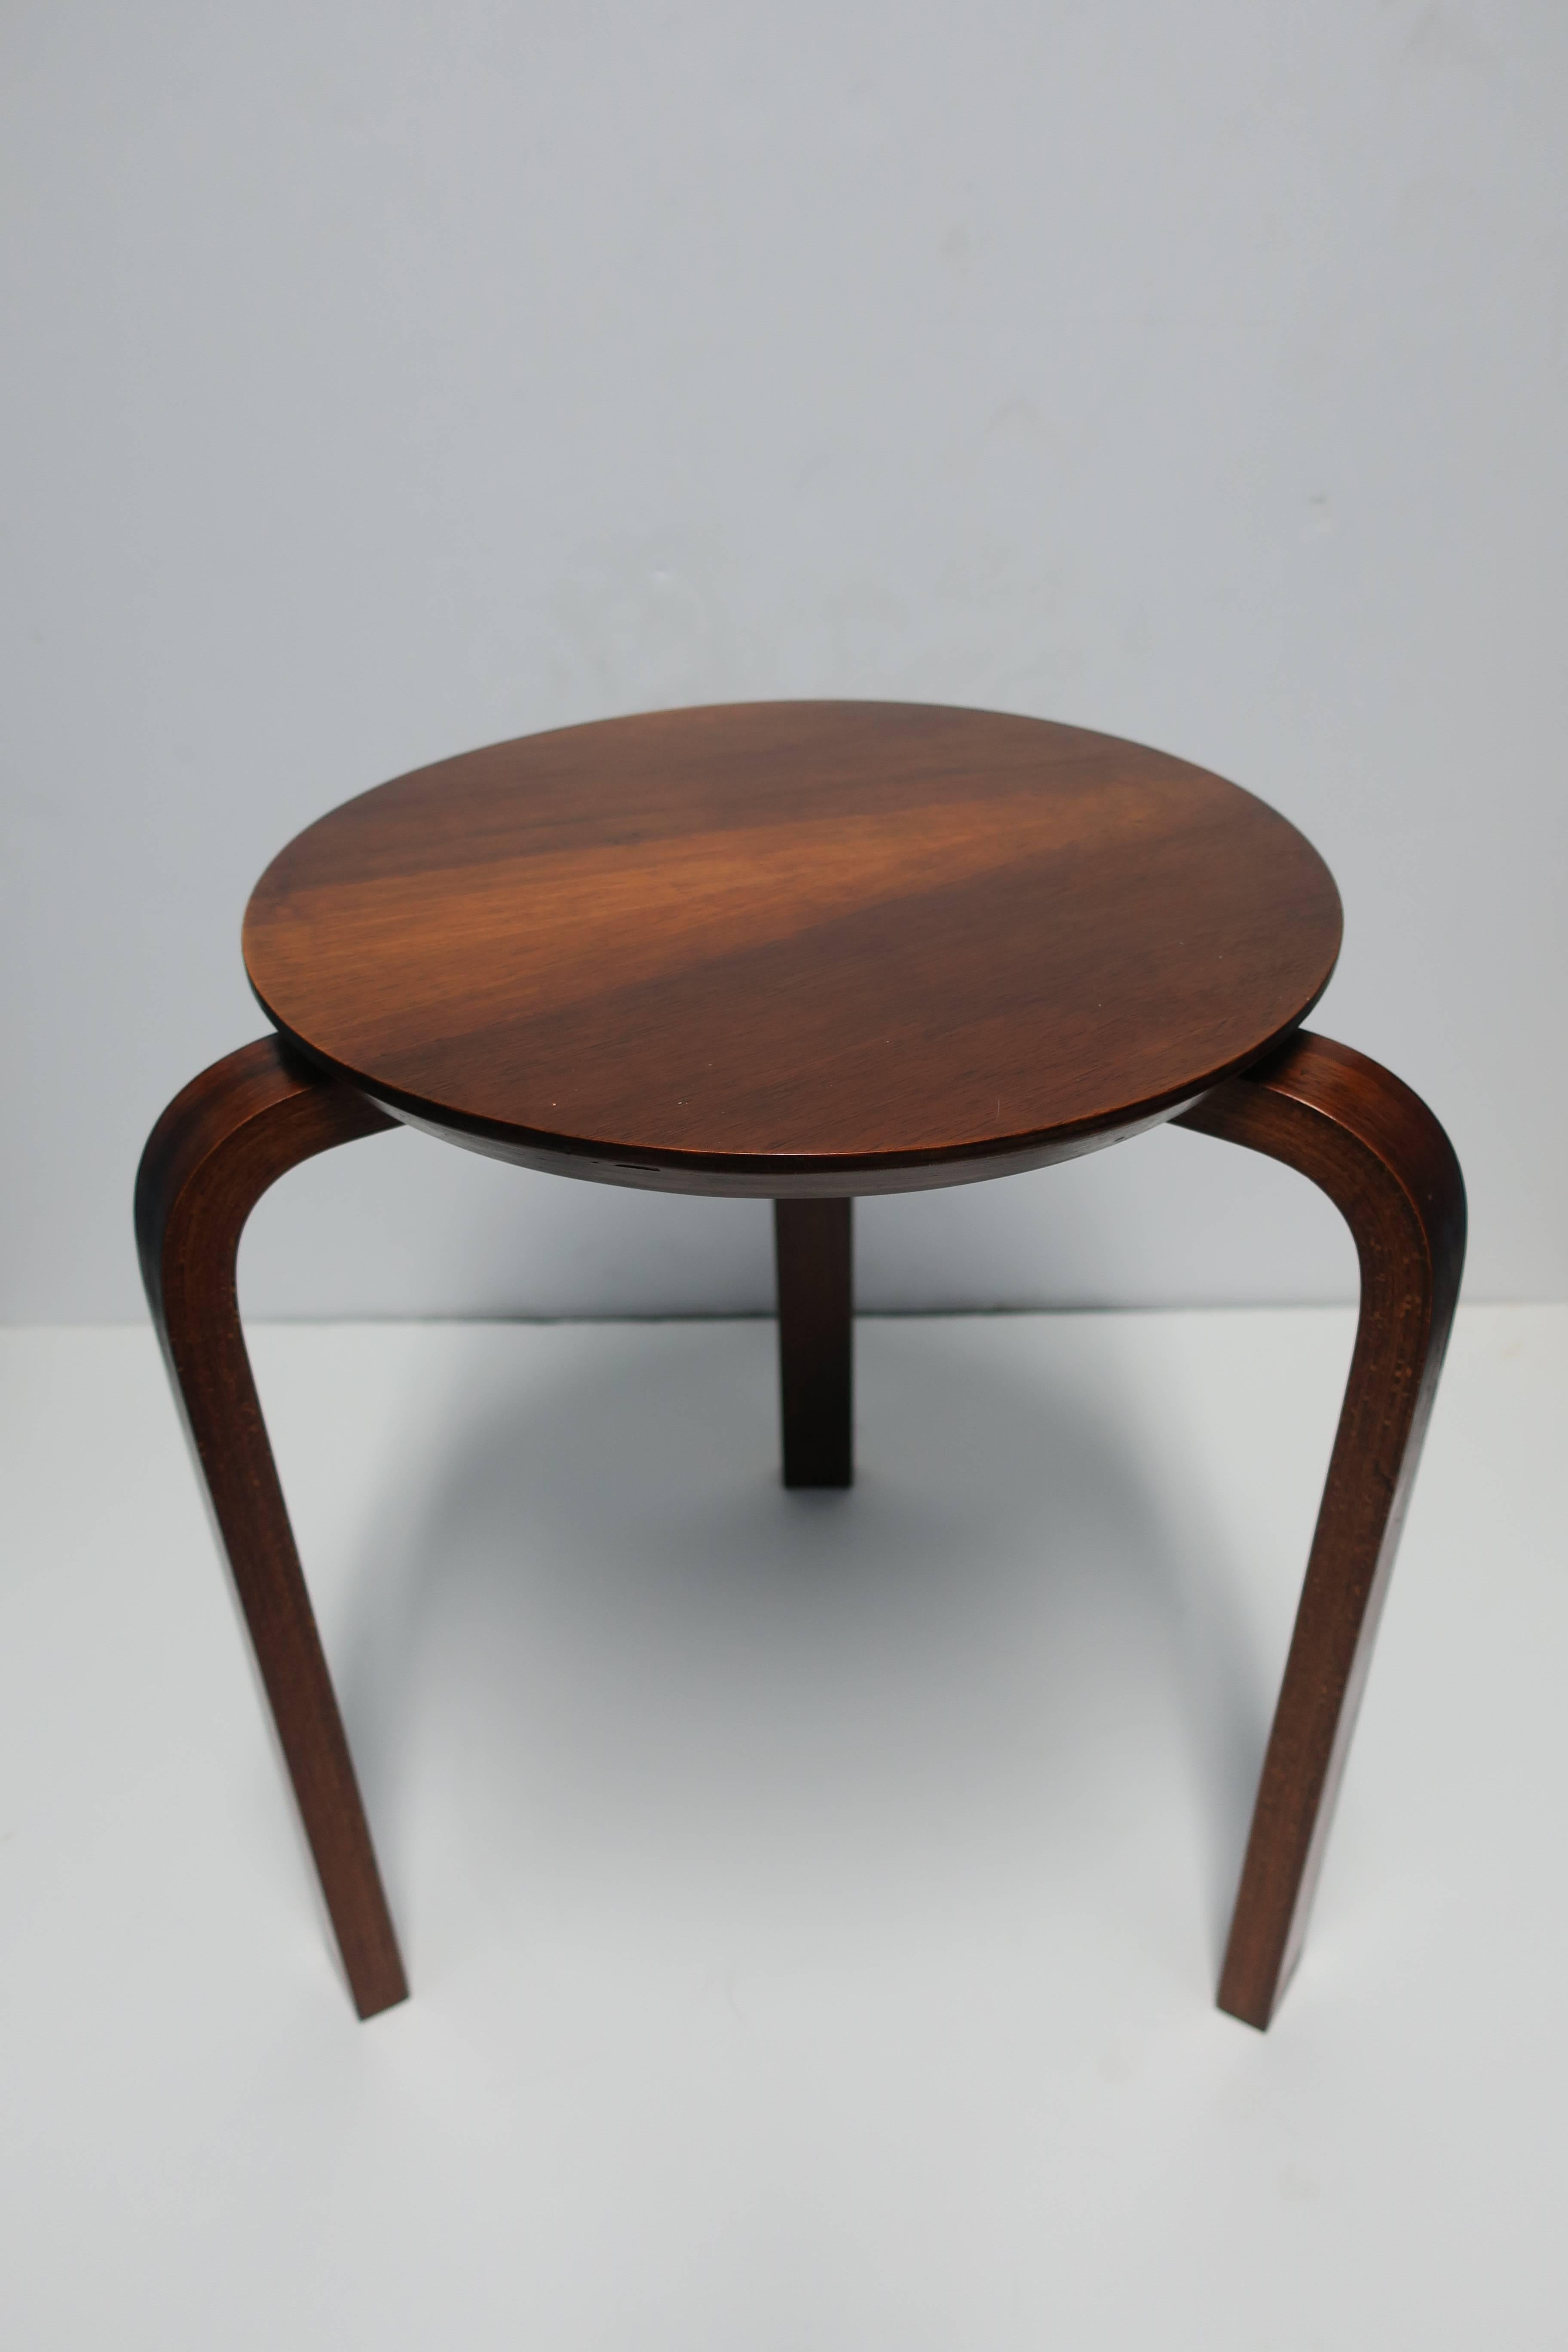 Bentwood Stool or Drinks Table  In Good Condition For Sale In New York, NY